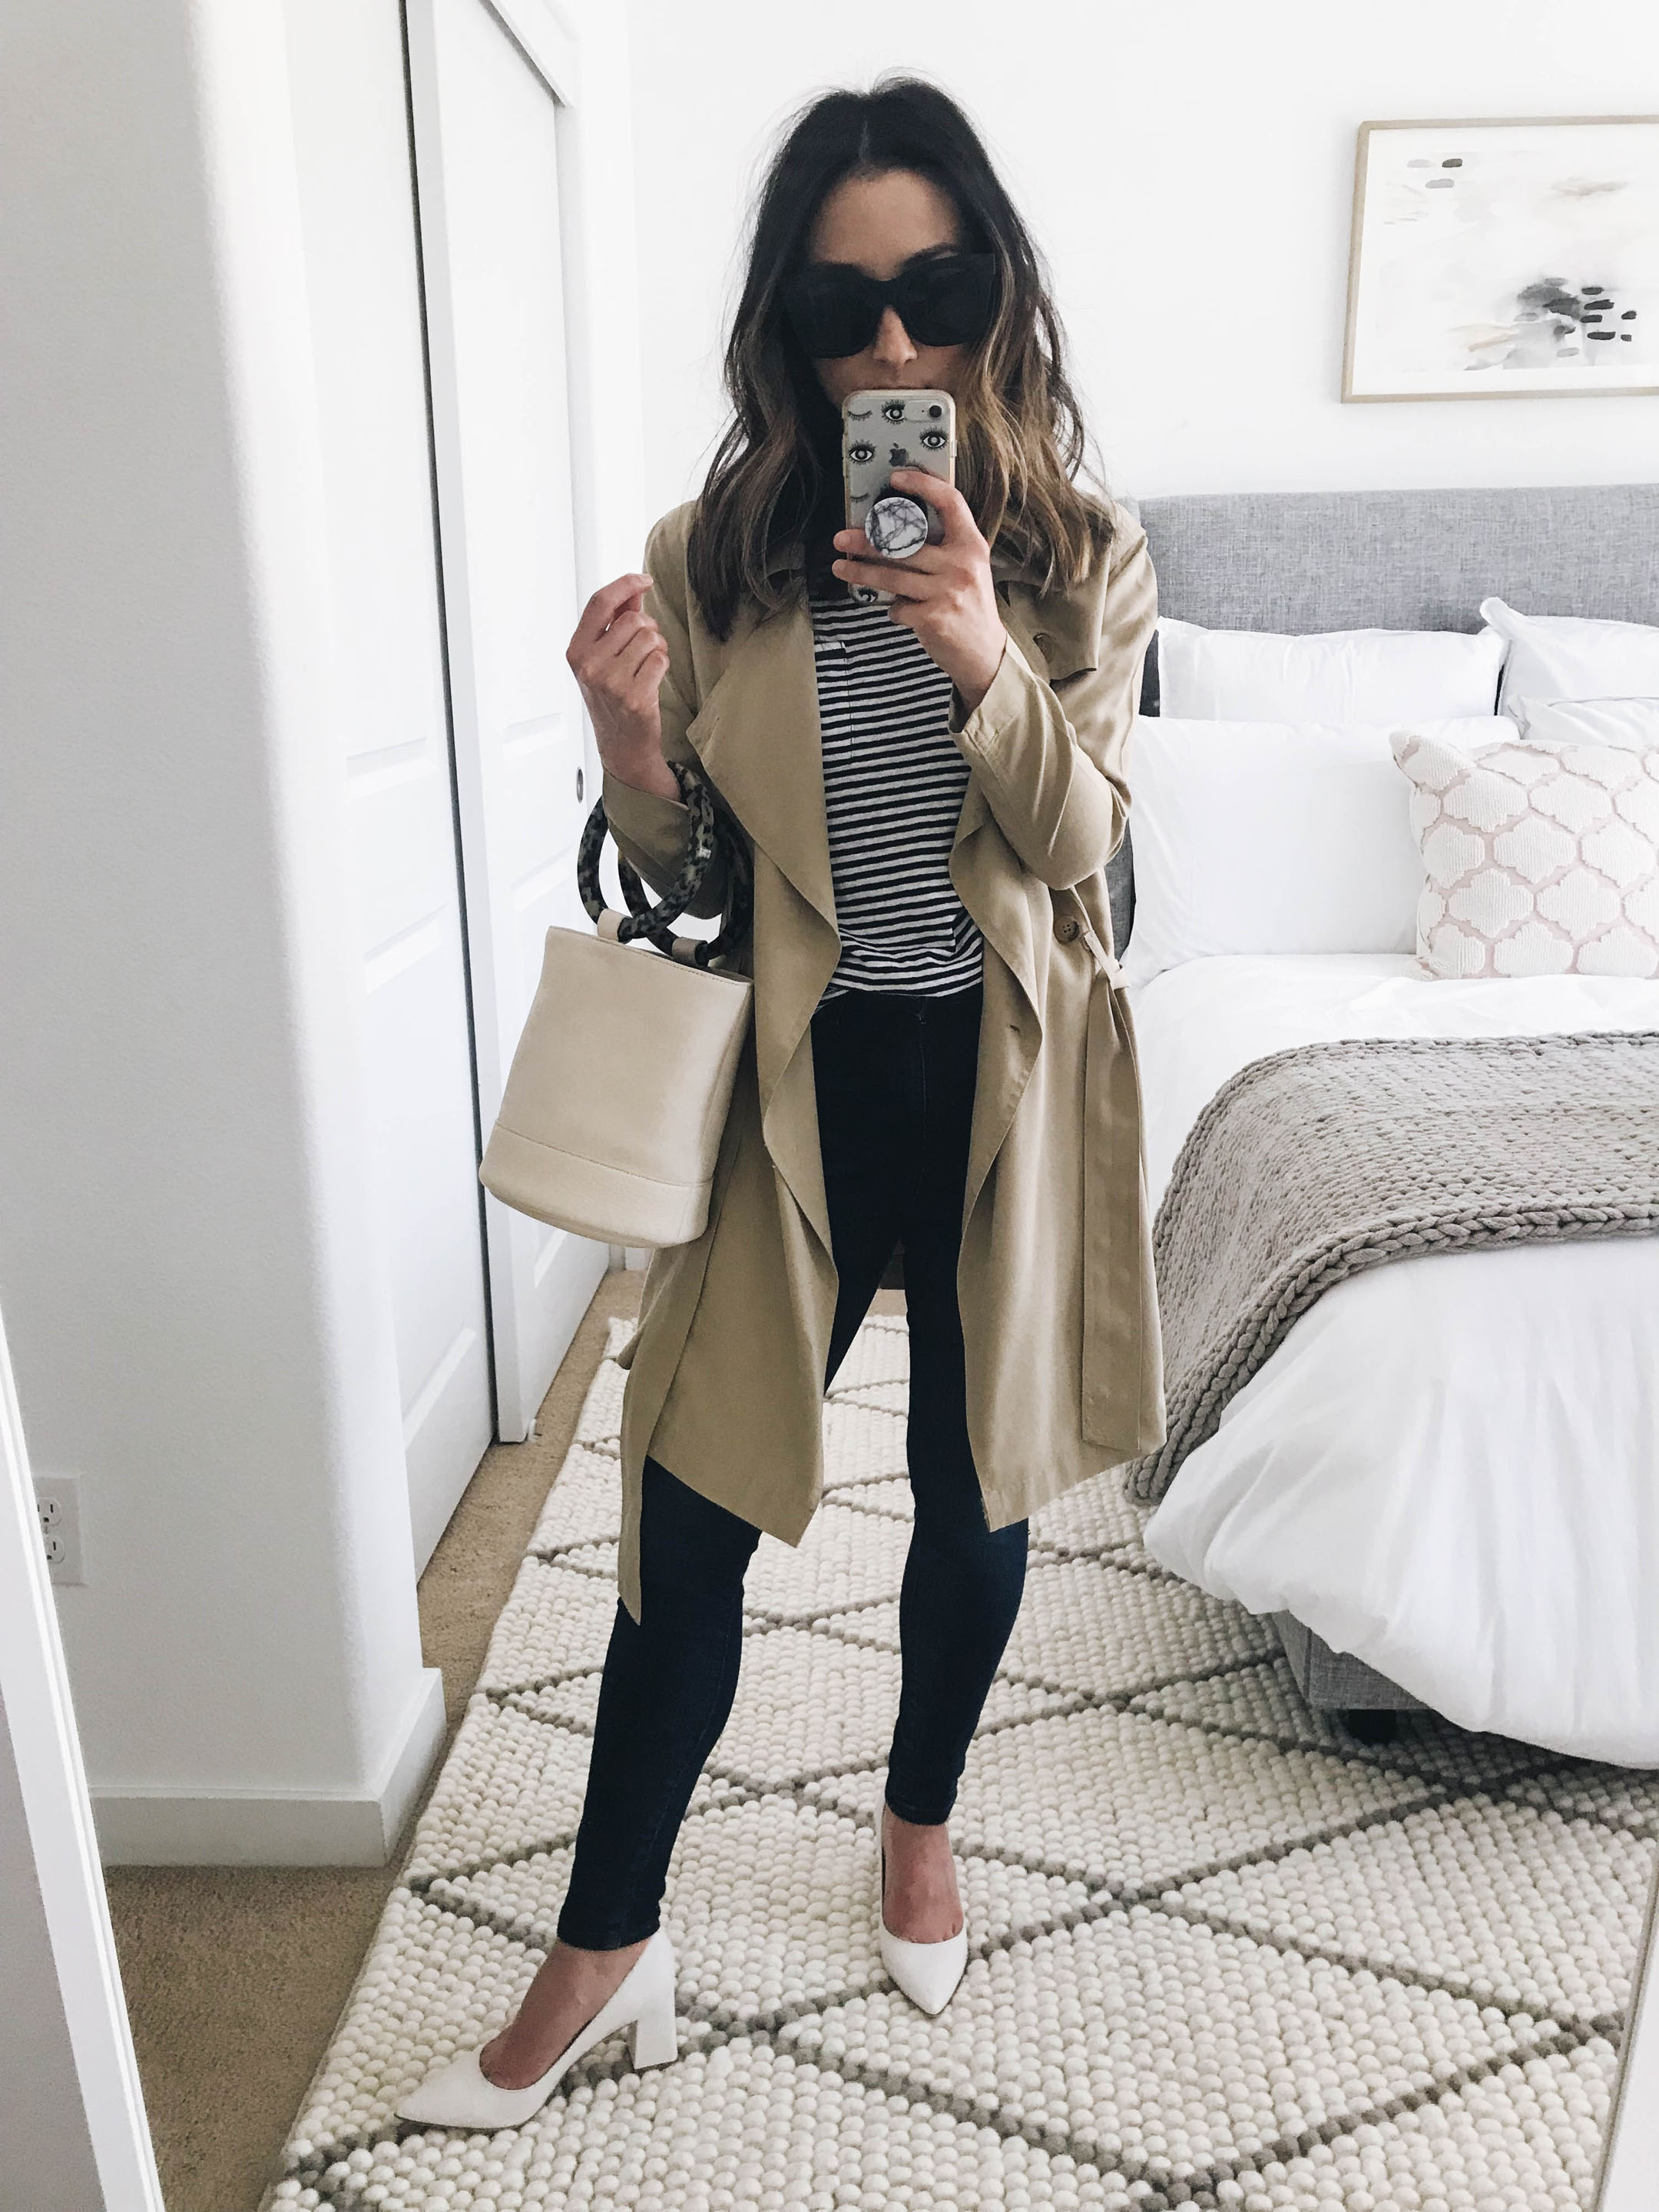 Transitional summer to fall outfits